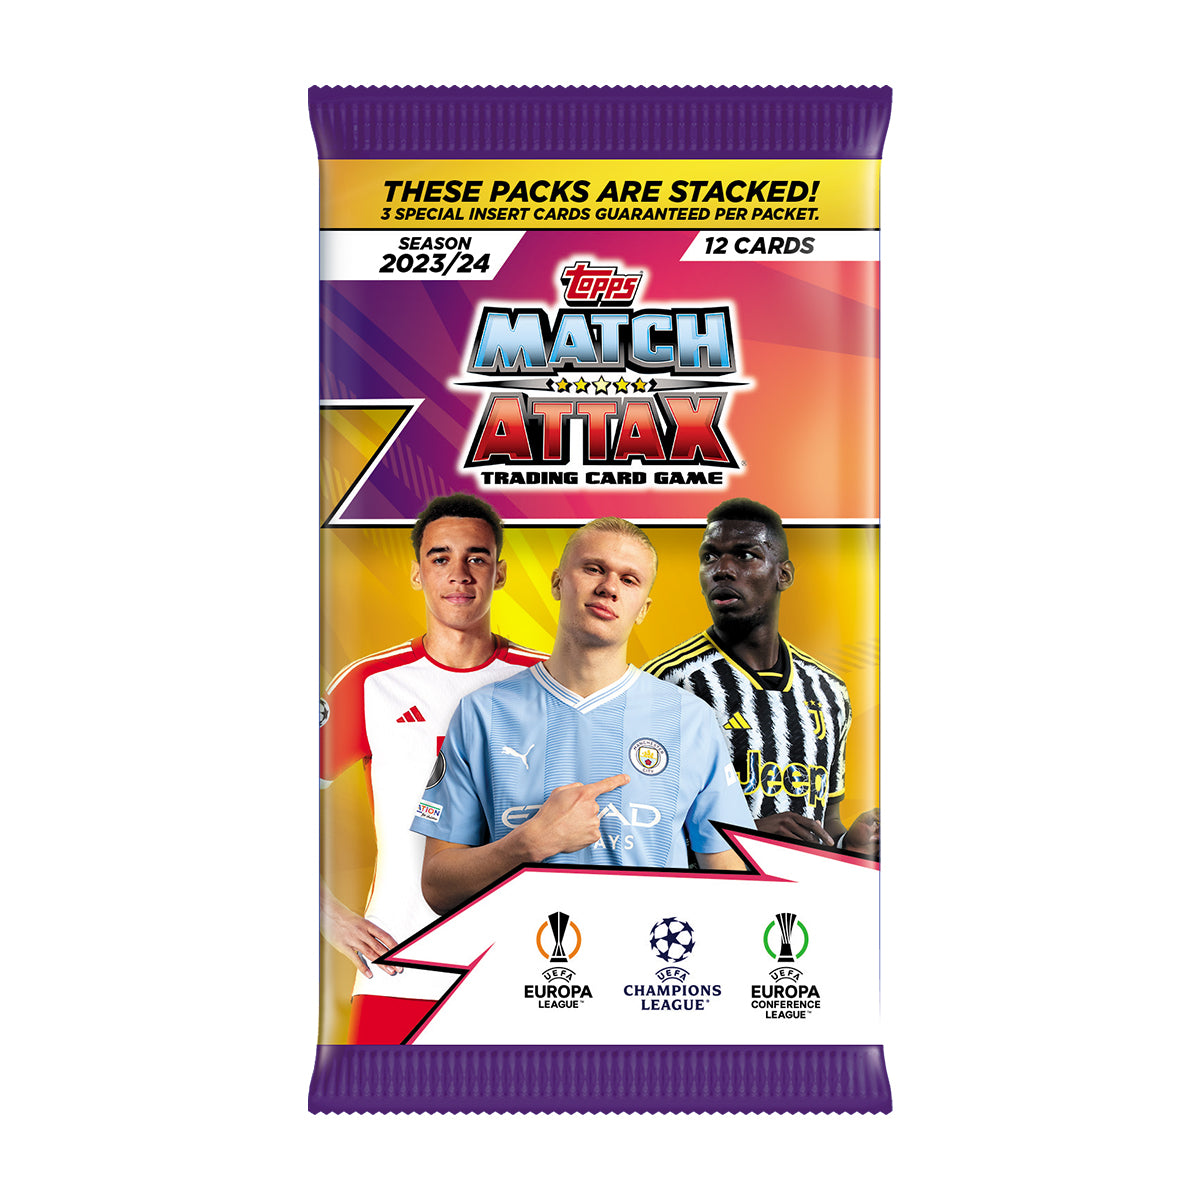 2023-24 TOPPS MATCH ATTAX UEFA CHAMPIONS LEAGUE CARDS - BUNDLE #1 (BOX & STARTER PACK) (ALBUM, 324 CARDS + 3 LE) (IN STOCK NOV 5)